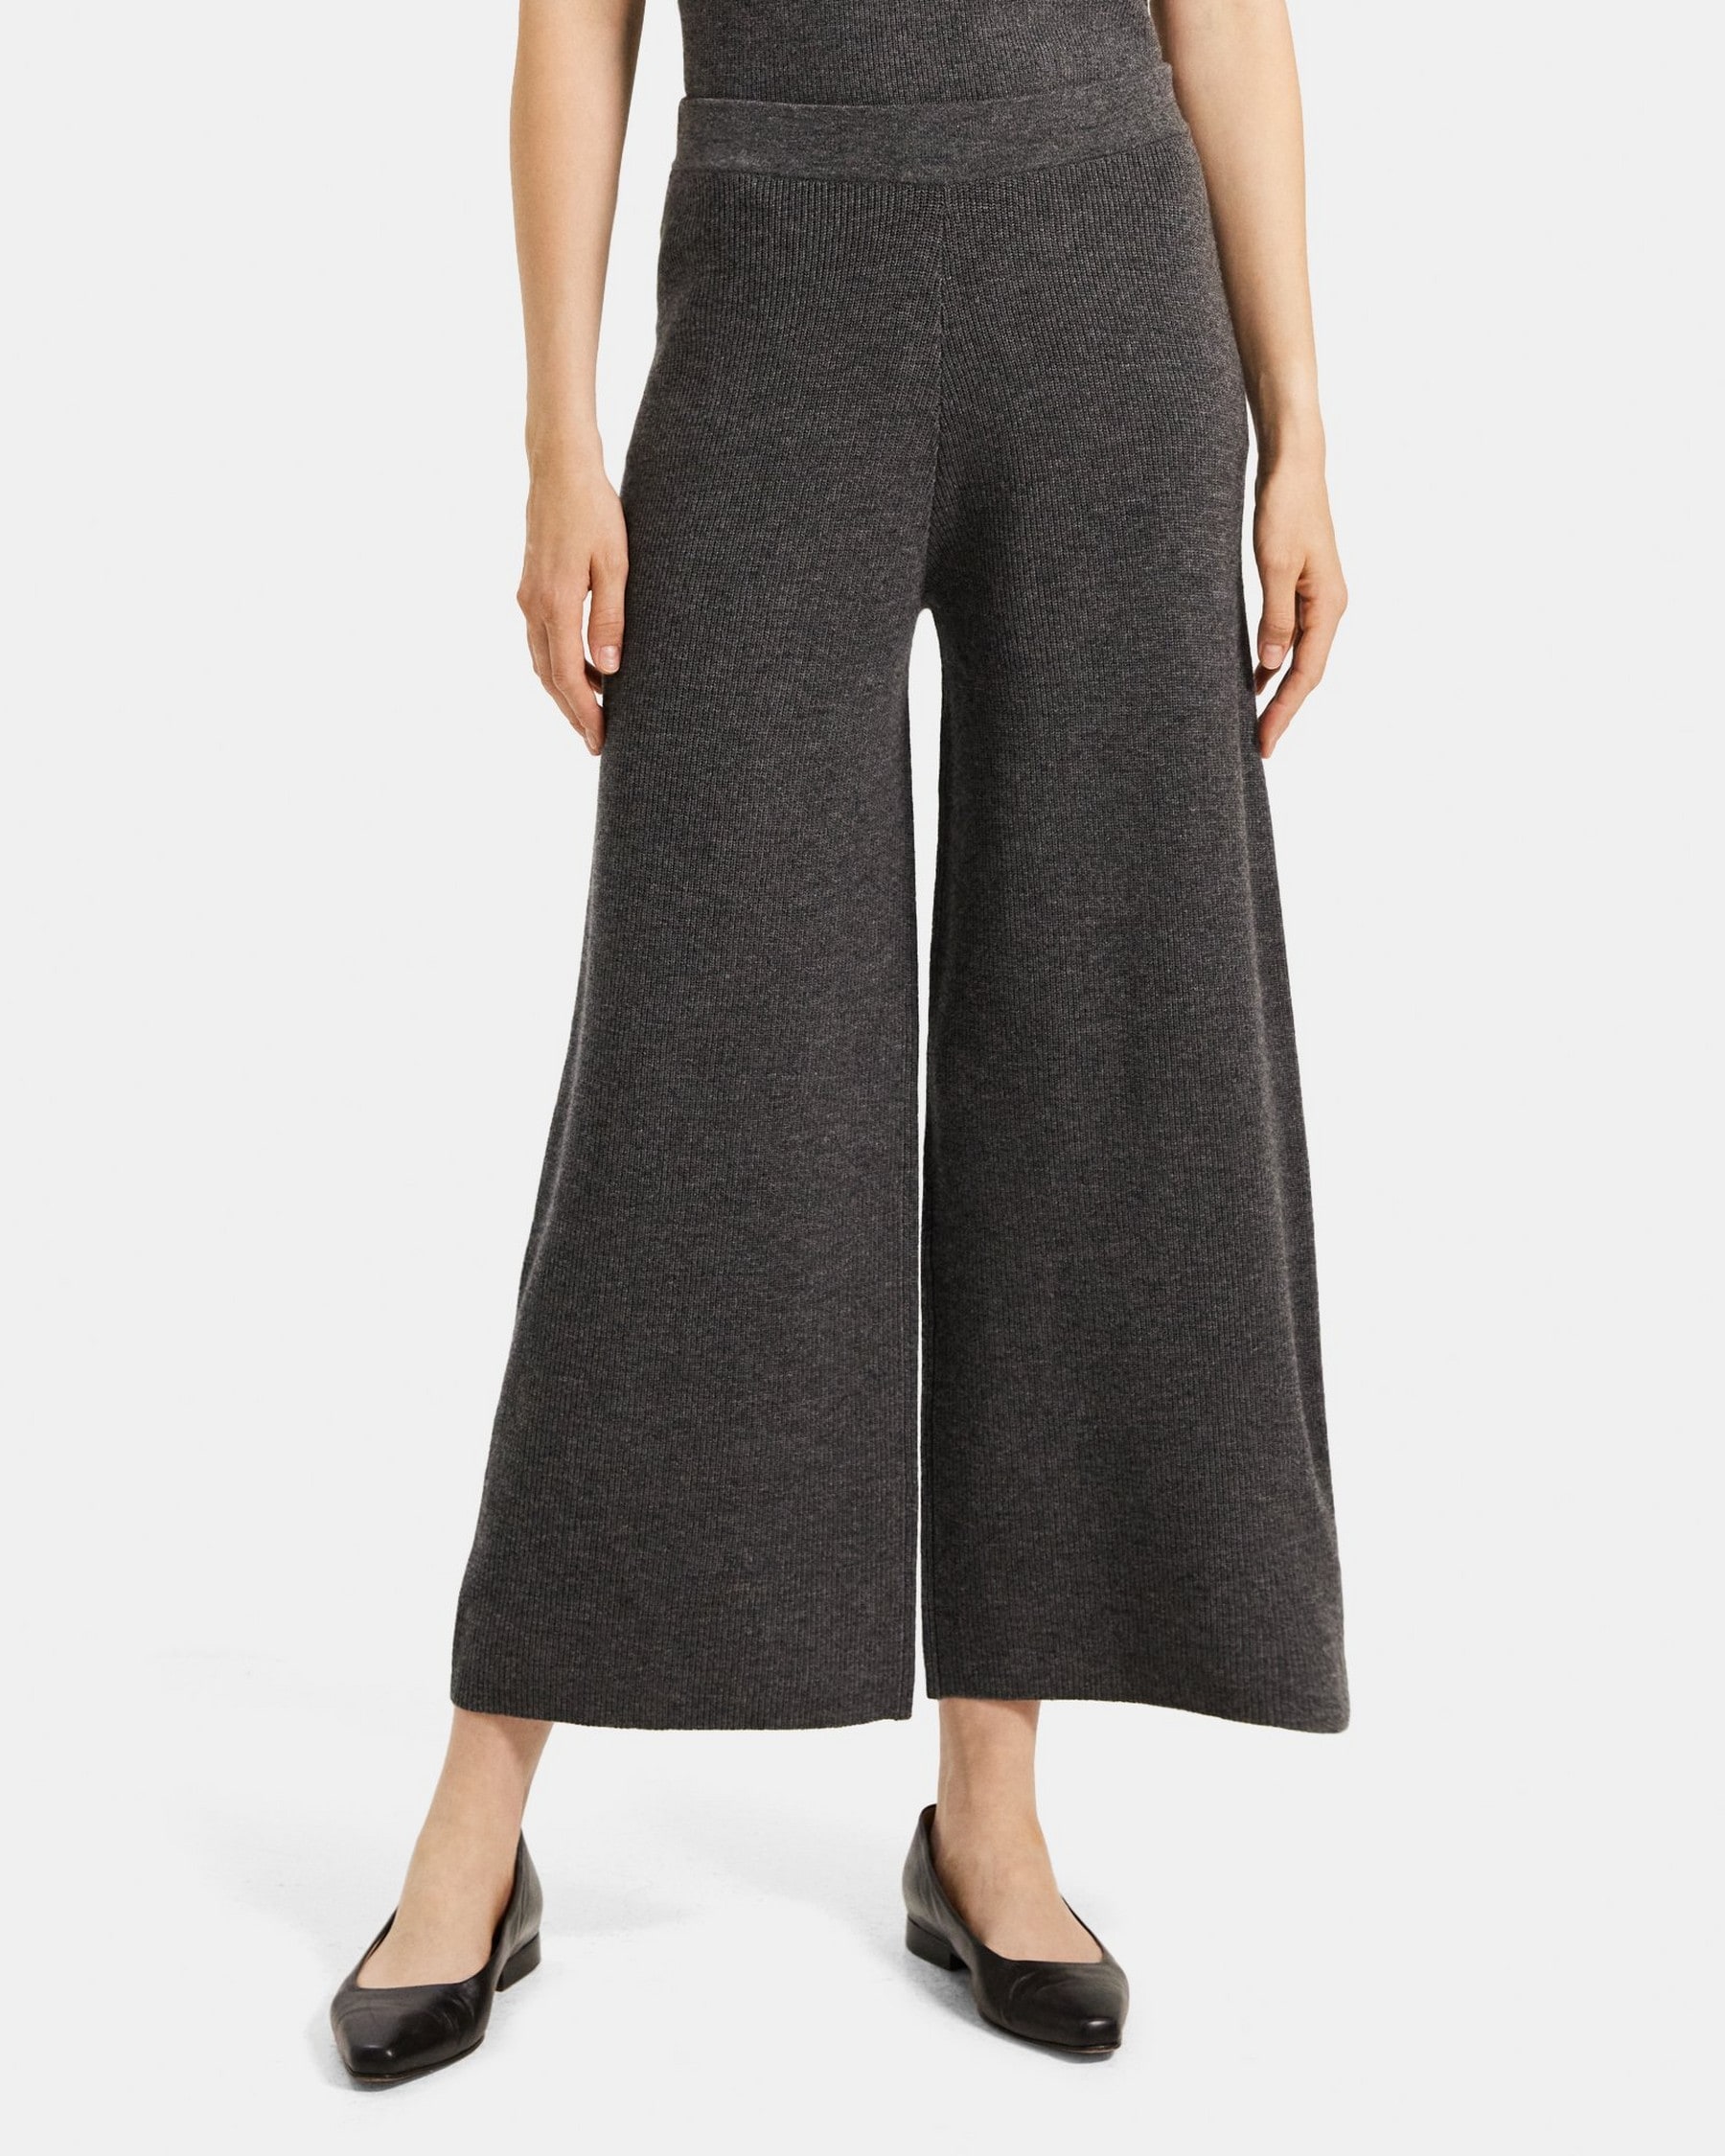 Knit Pant in Wool-Cashmere